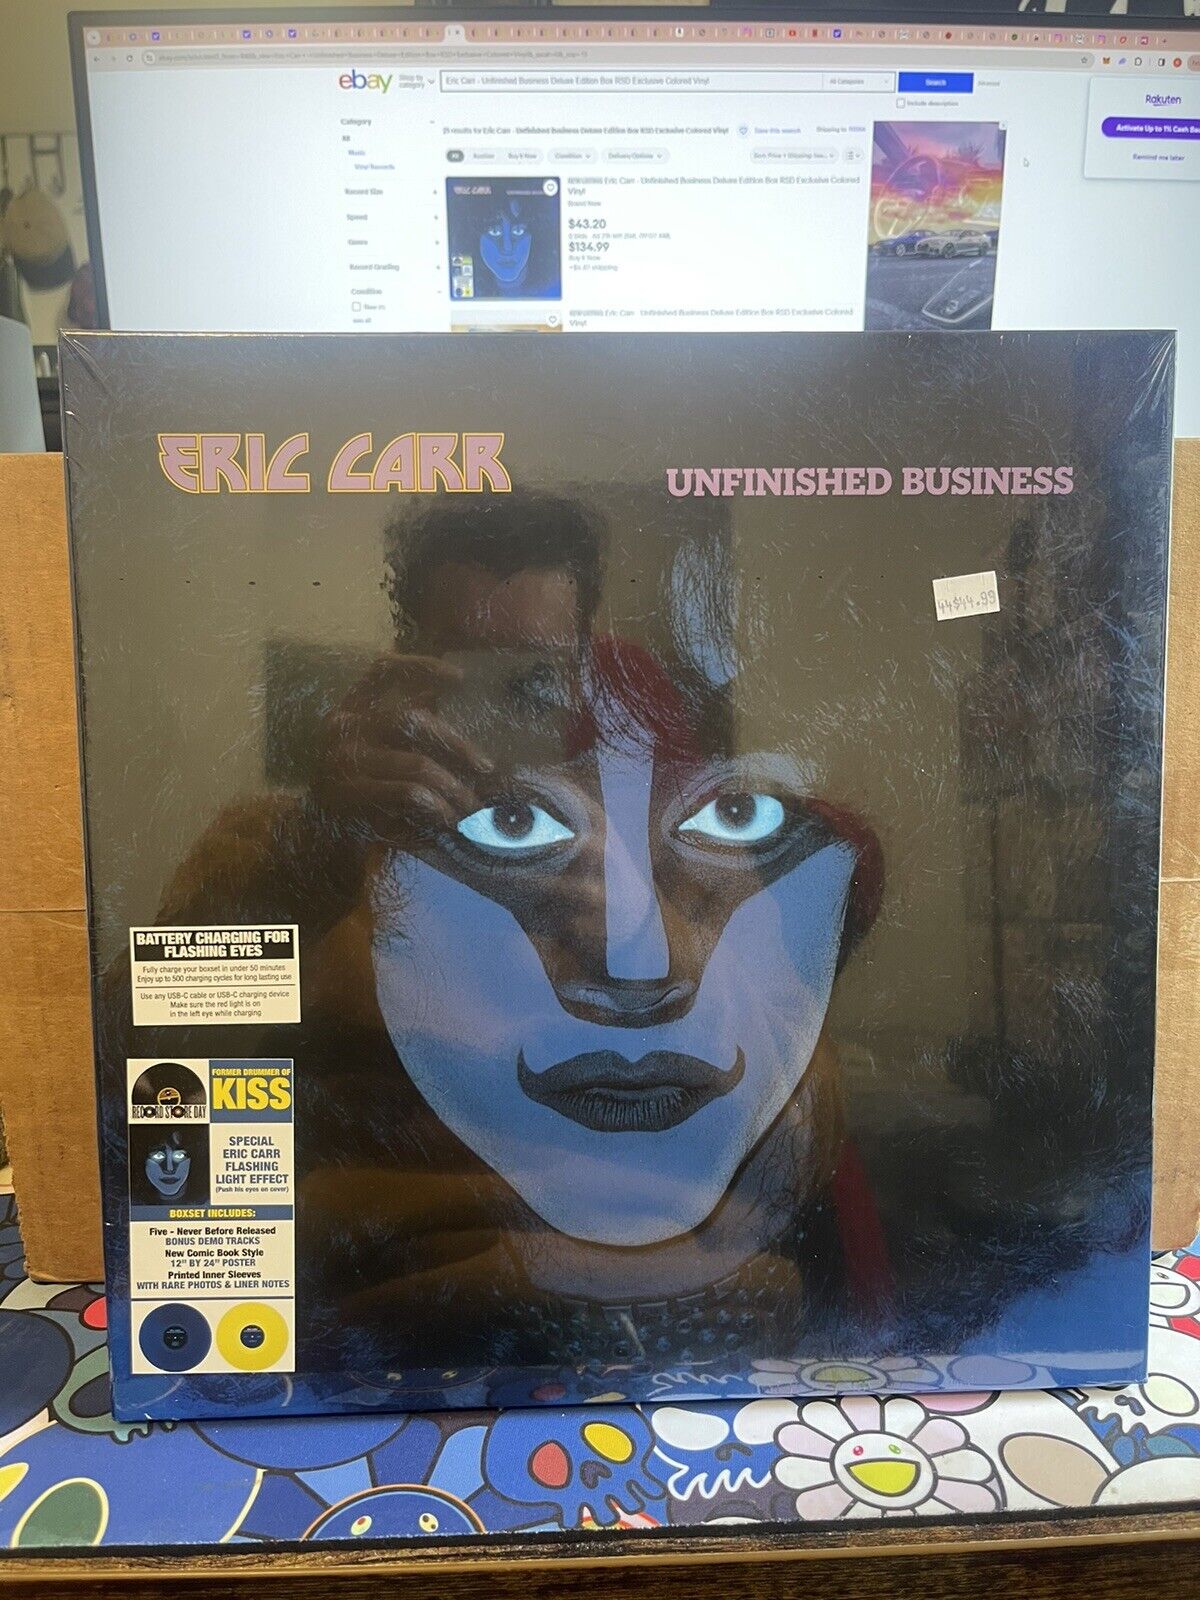 Eric Carr - Unfinished Business Deluxe Edition Box RSD Exclusive Colored Vinyl